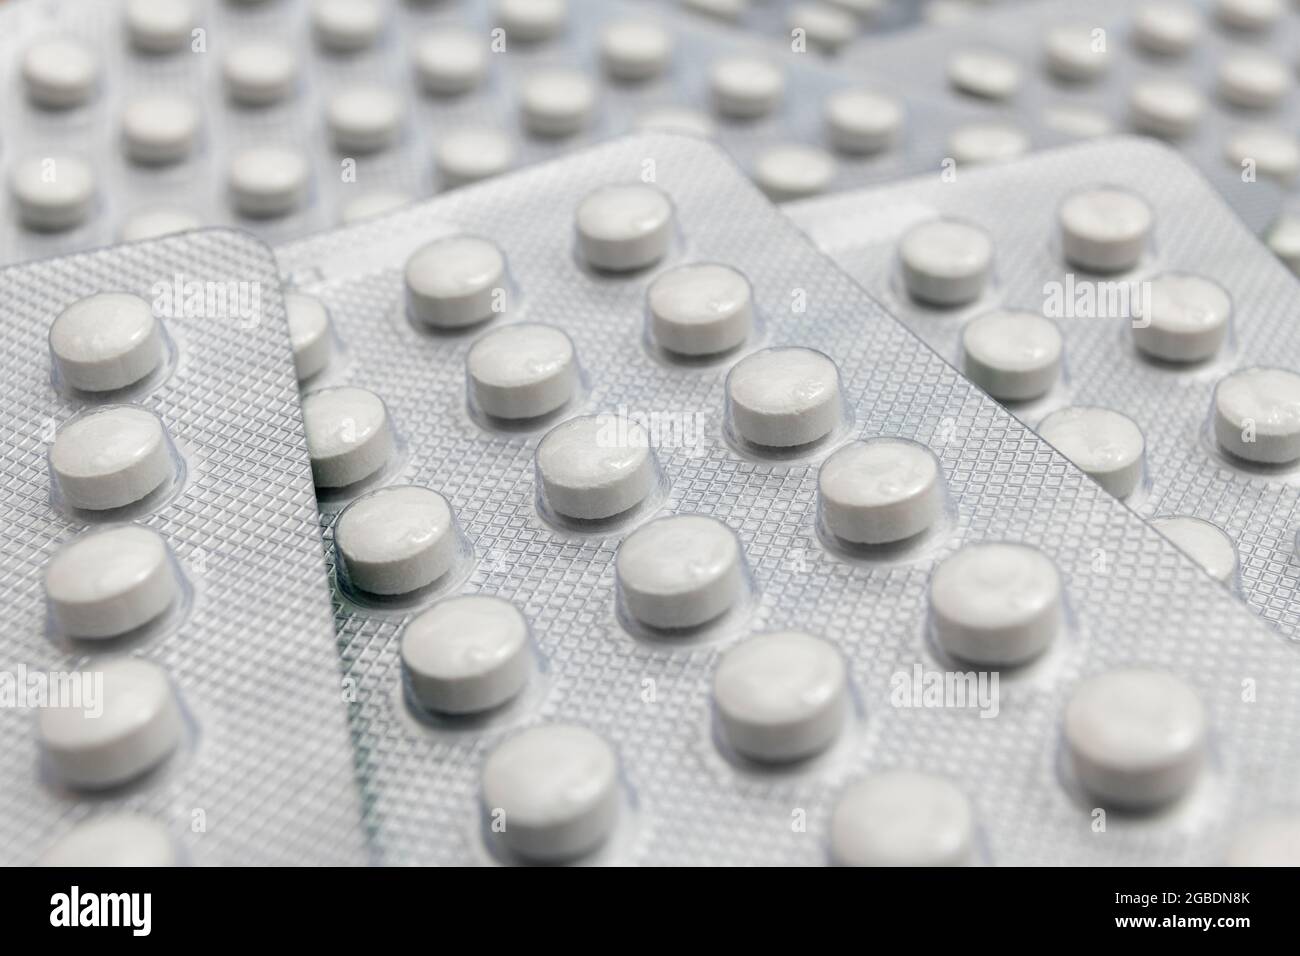 Round Pills Of Vitamin D 3 Made By Uk Neutraceuticals Company Vitabiotics Ltd Good Example Of Blister Packaging And Medical Product Encapsulation Stock Photo Alamy